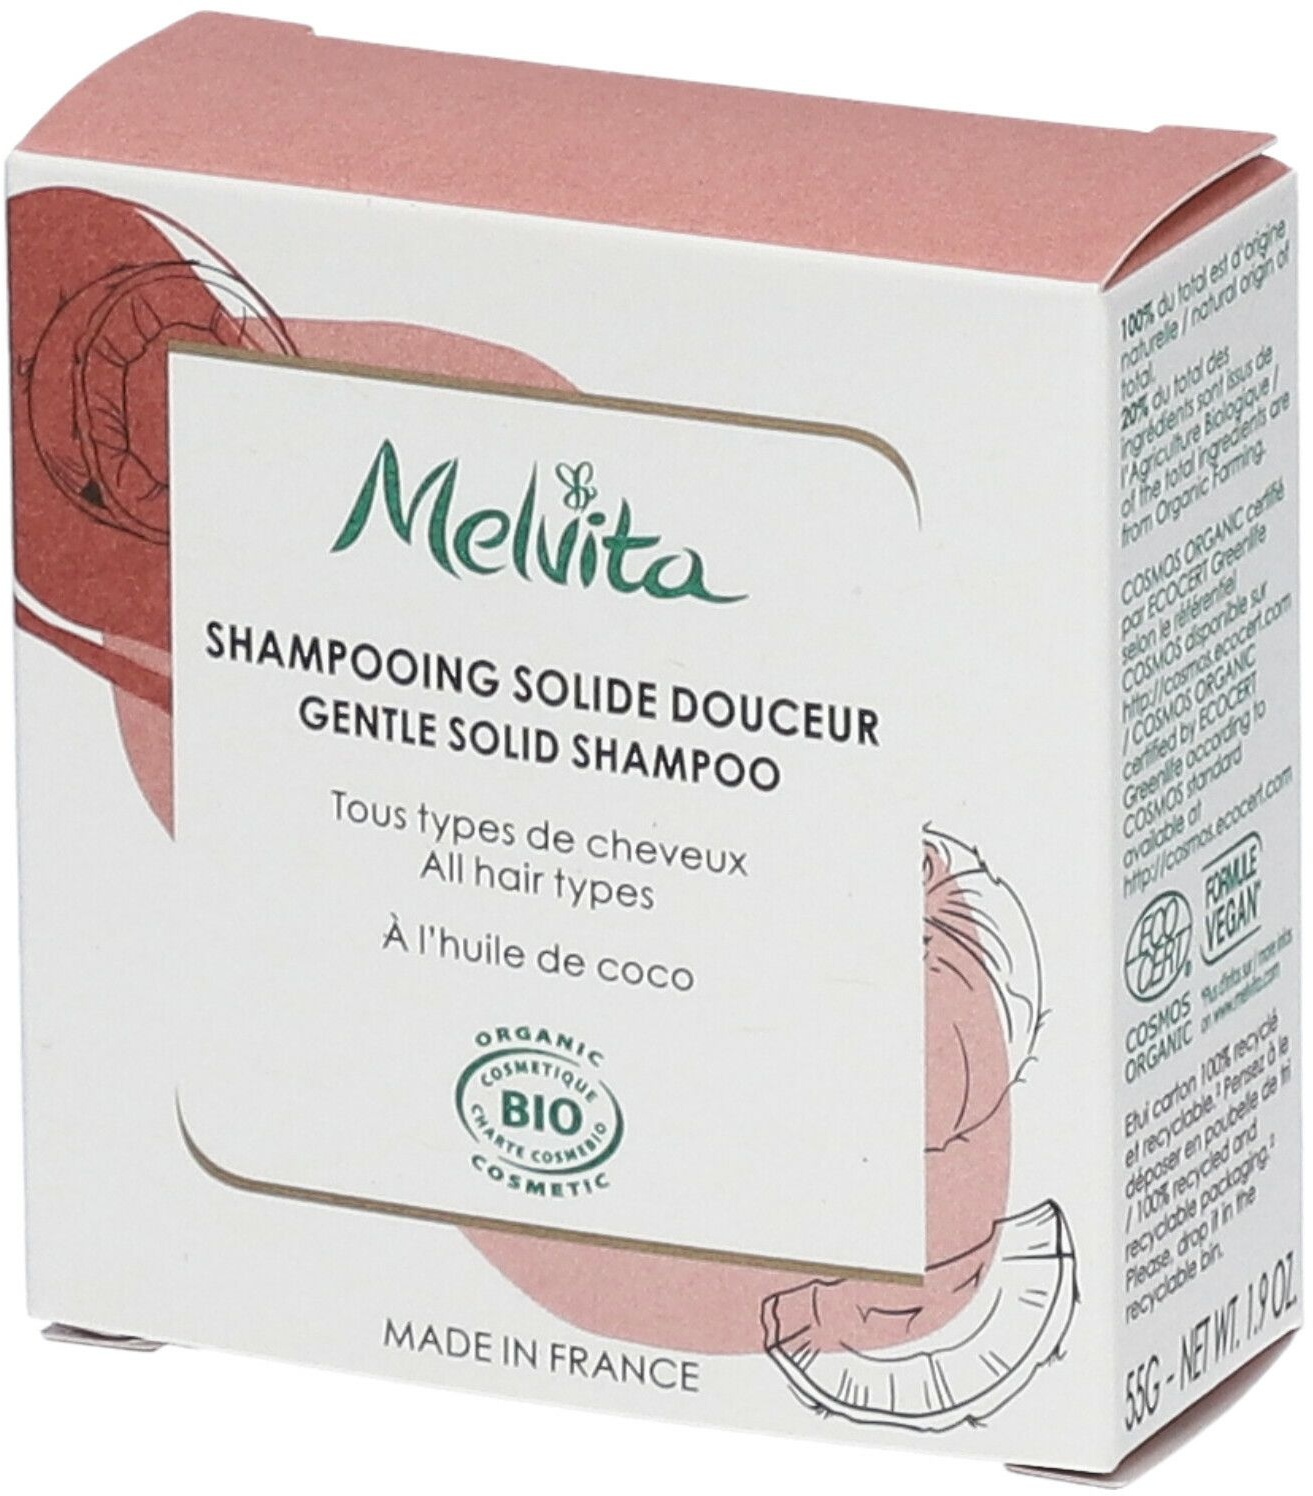 Melvita Shampoing solide douceur 55 g shampooing